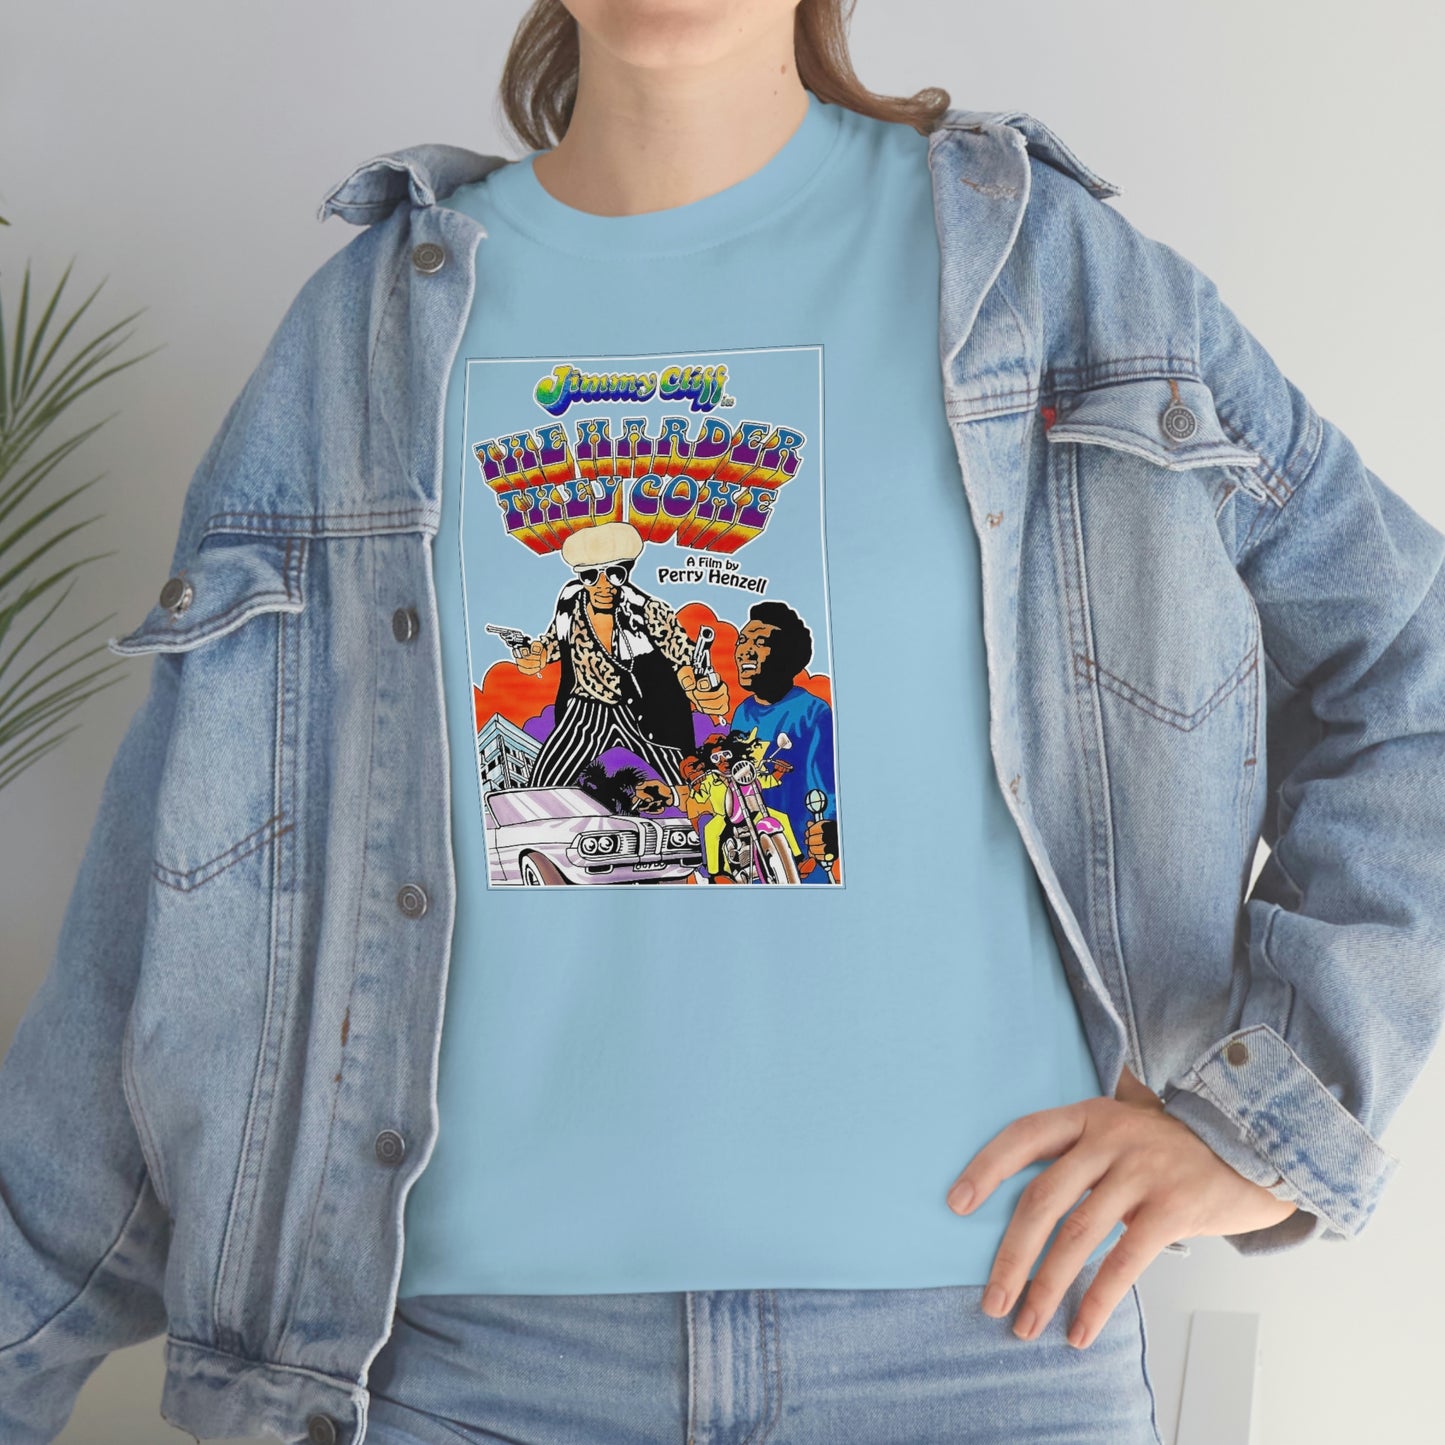 The Harder They Come T-Shirt